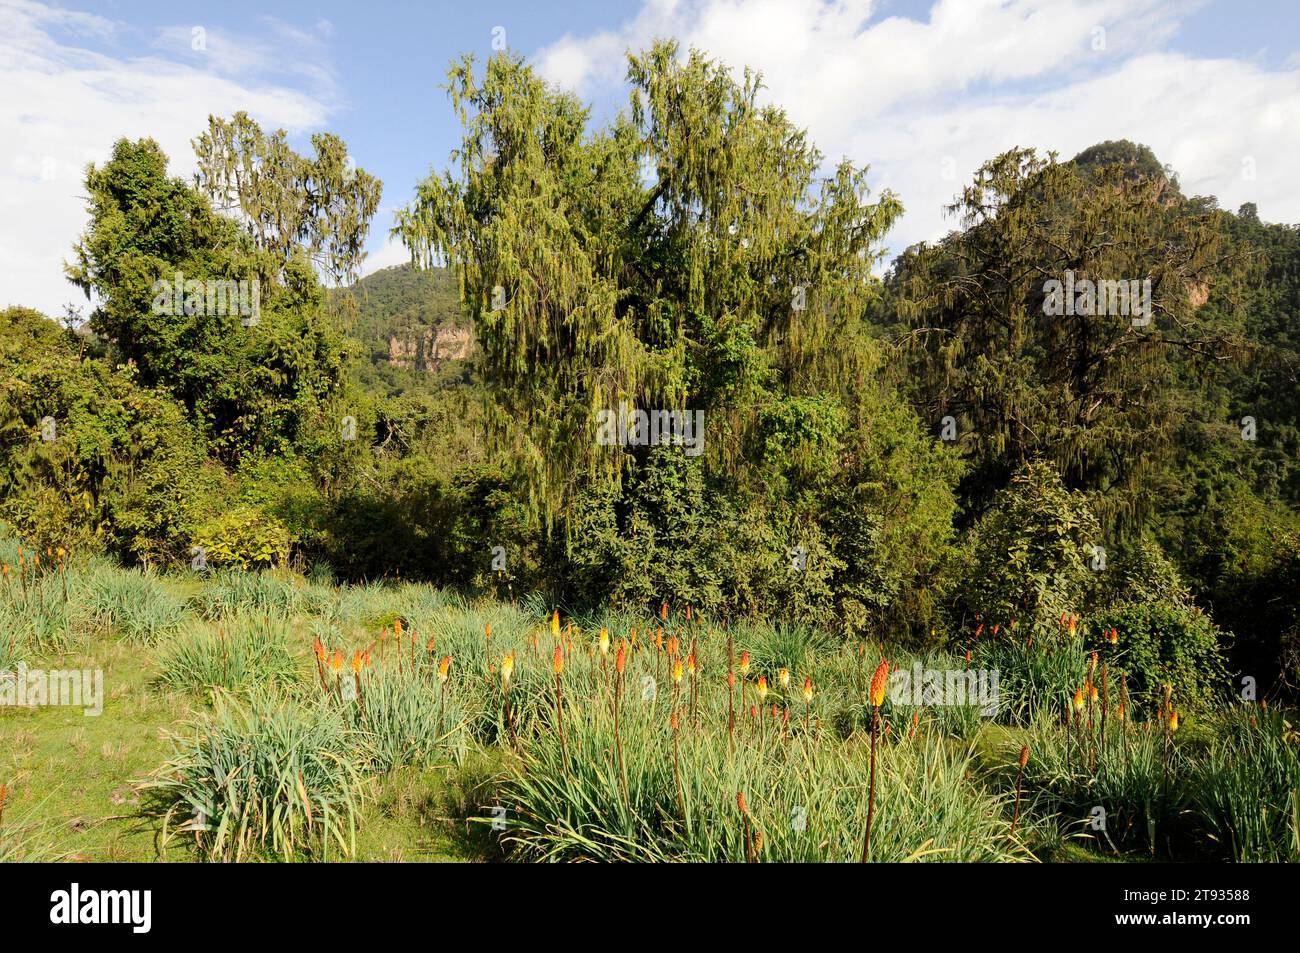 African juniper or african pencil cedar (Juniperus procera) in background and red hot poker or torch lily (Kniphofia foliosa) in foreground. This phot Stock Photo